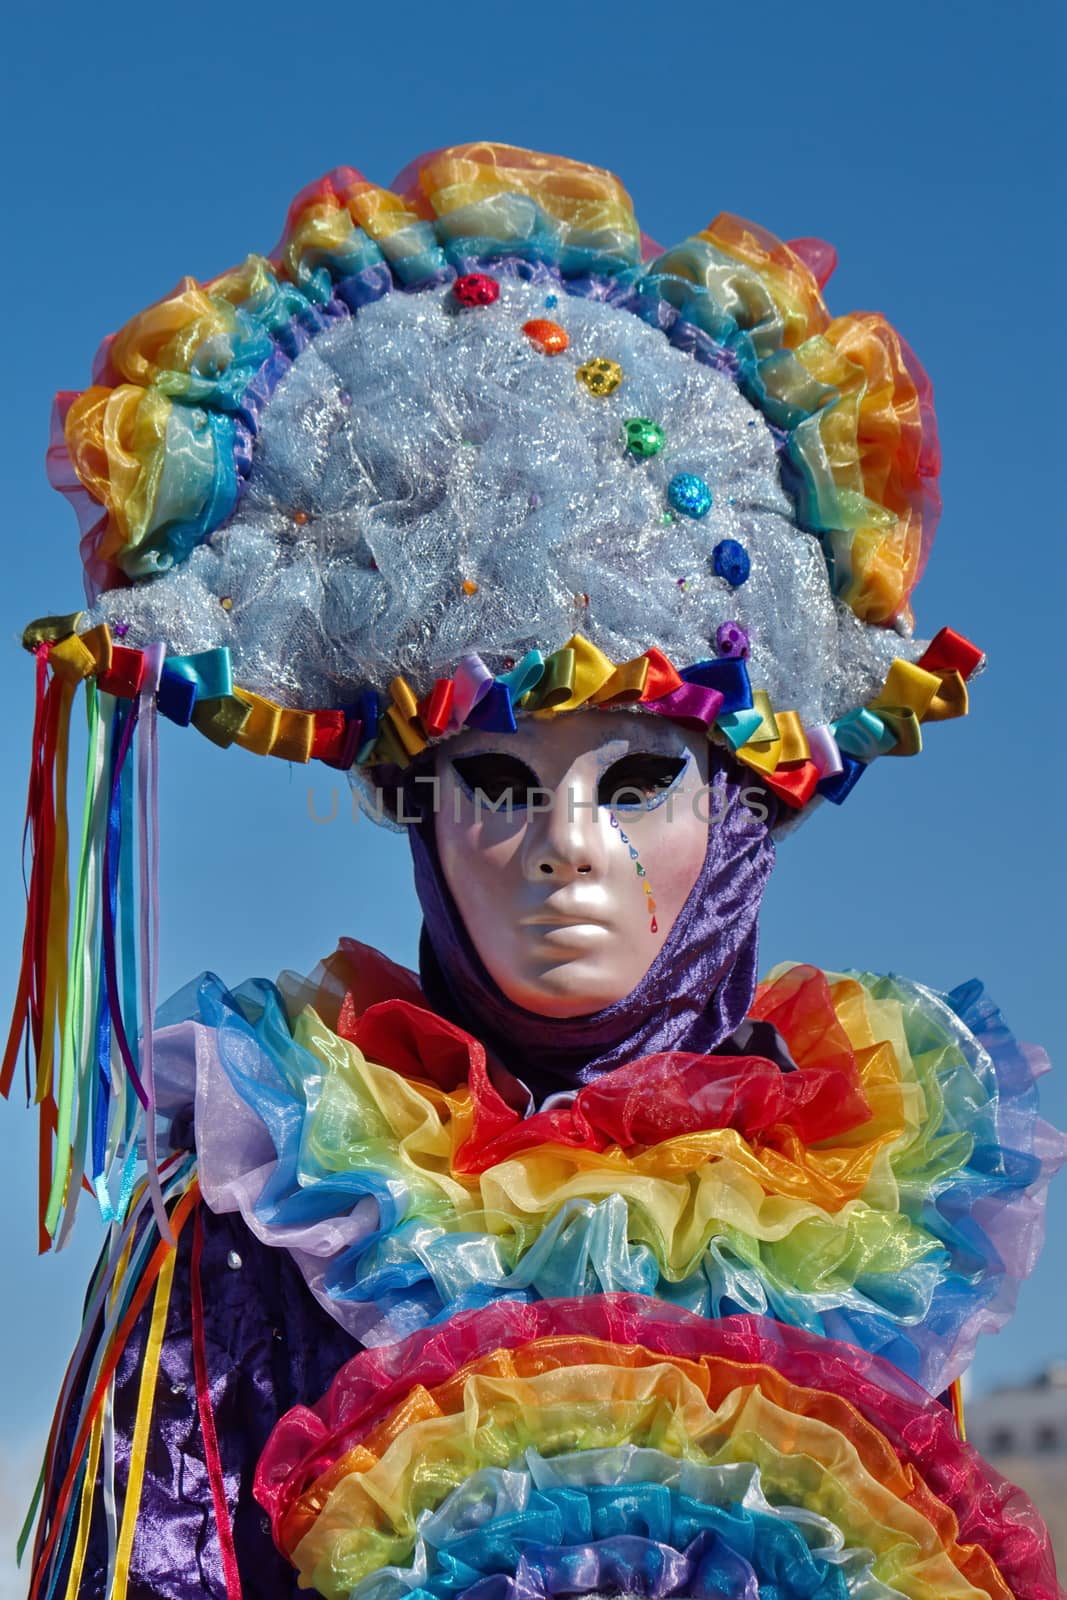 ANNECY, FRANCE, MAR 16 : Colorful portrait at the carnival in Annecy, France, on March 16 2014.